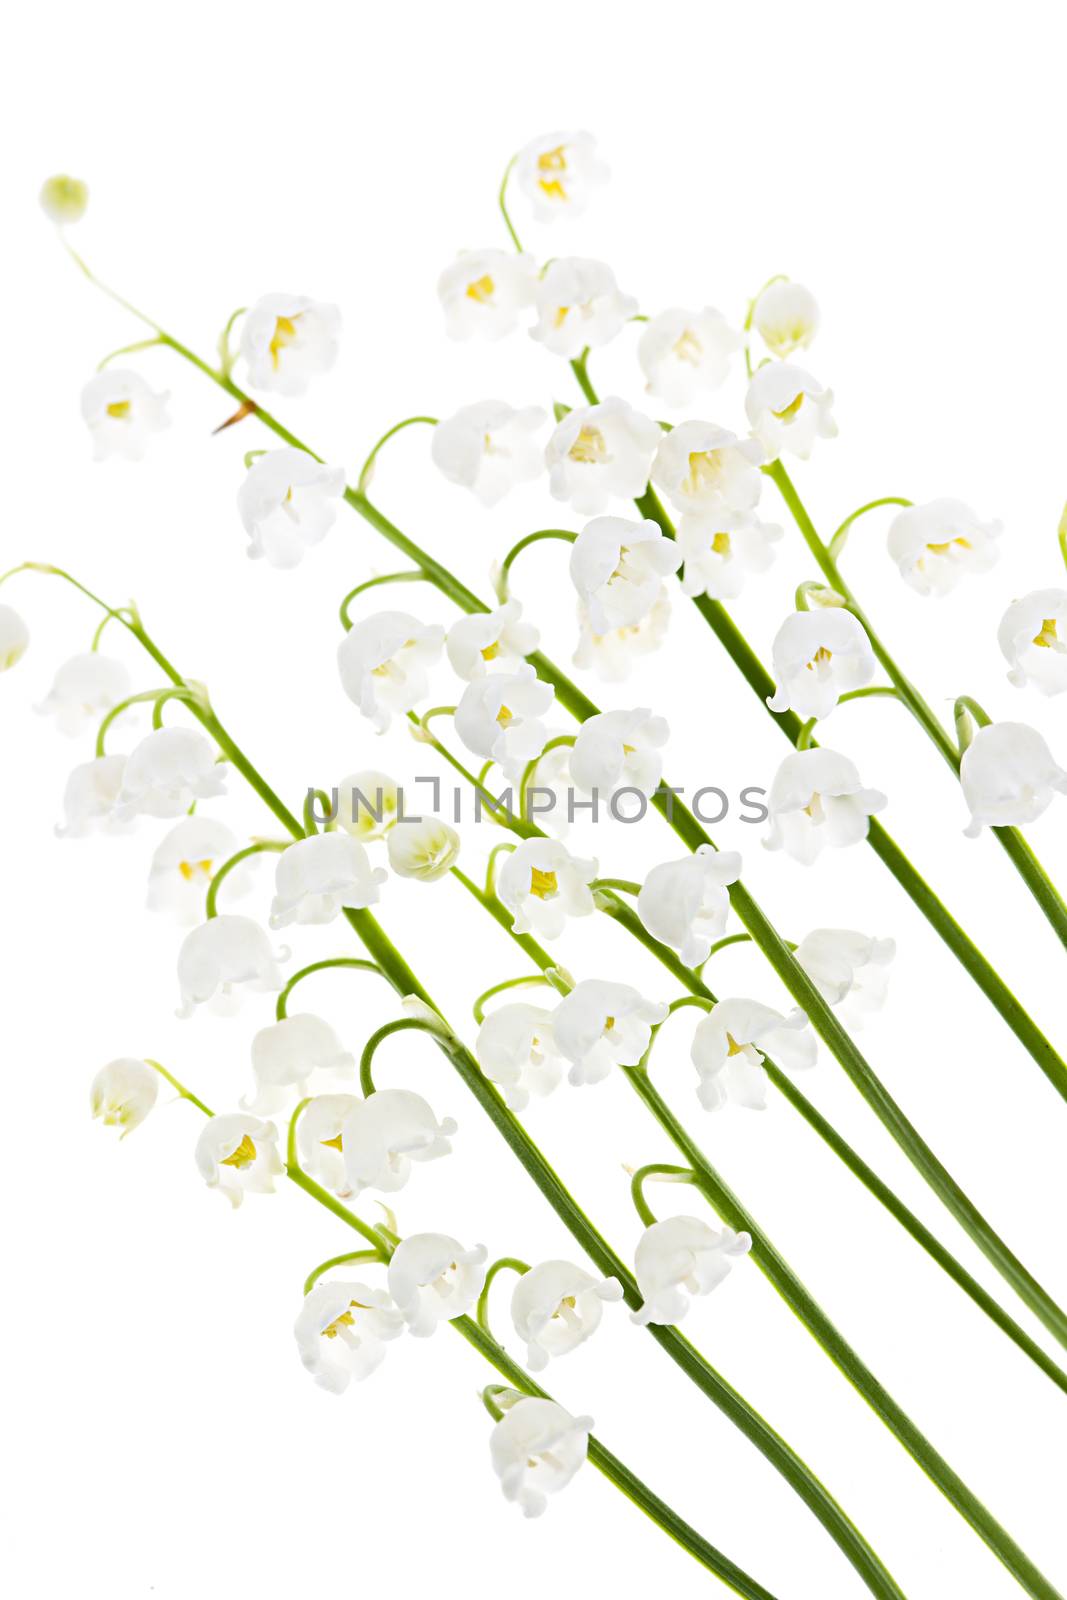 Lily-of-the-valley flowers on white by elenathewise